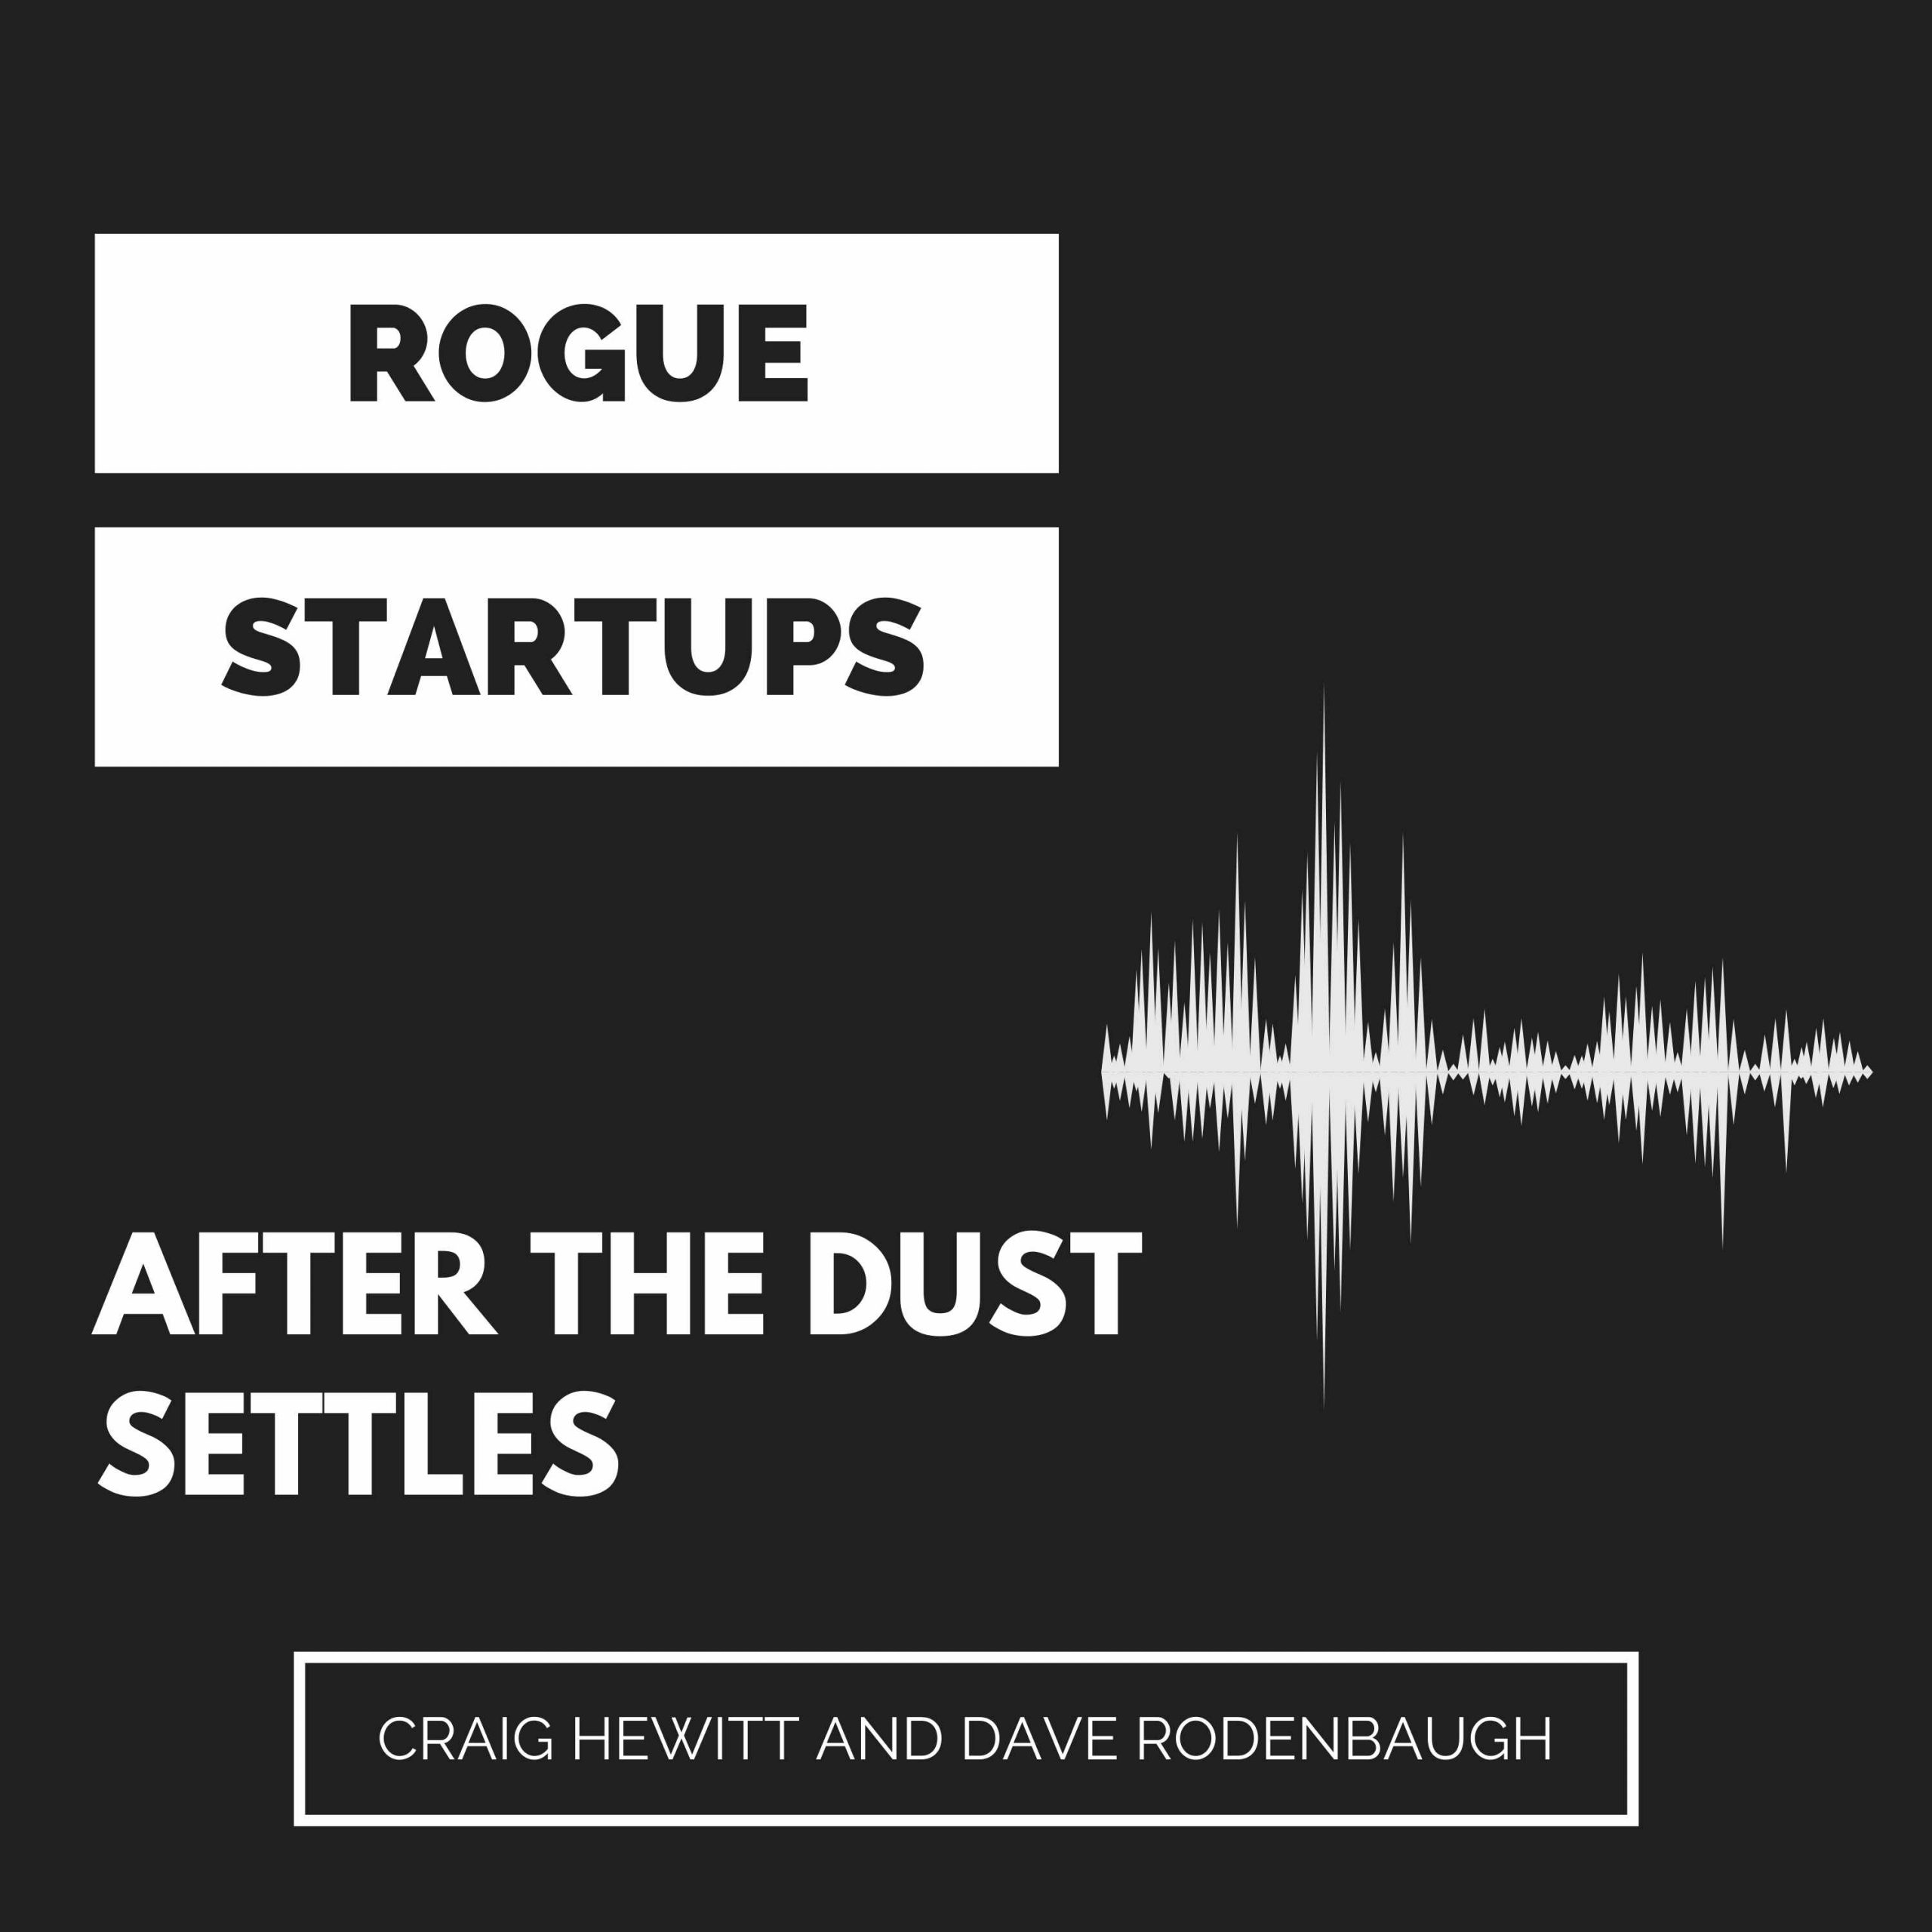 RS251: After the dust settles